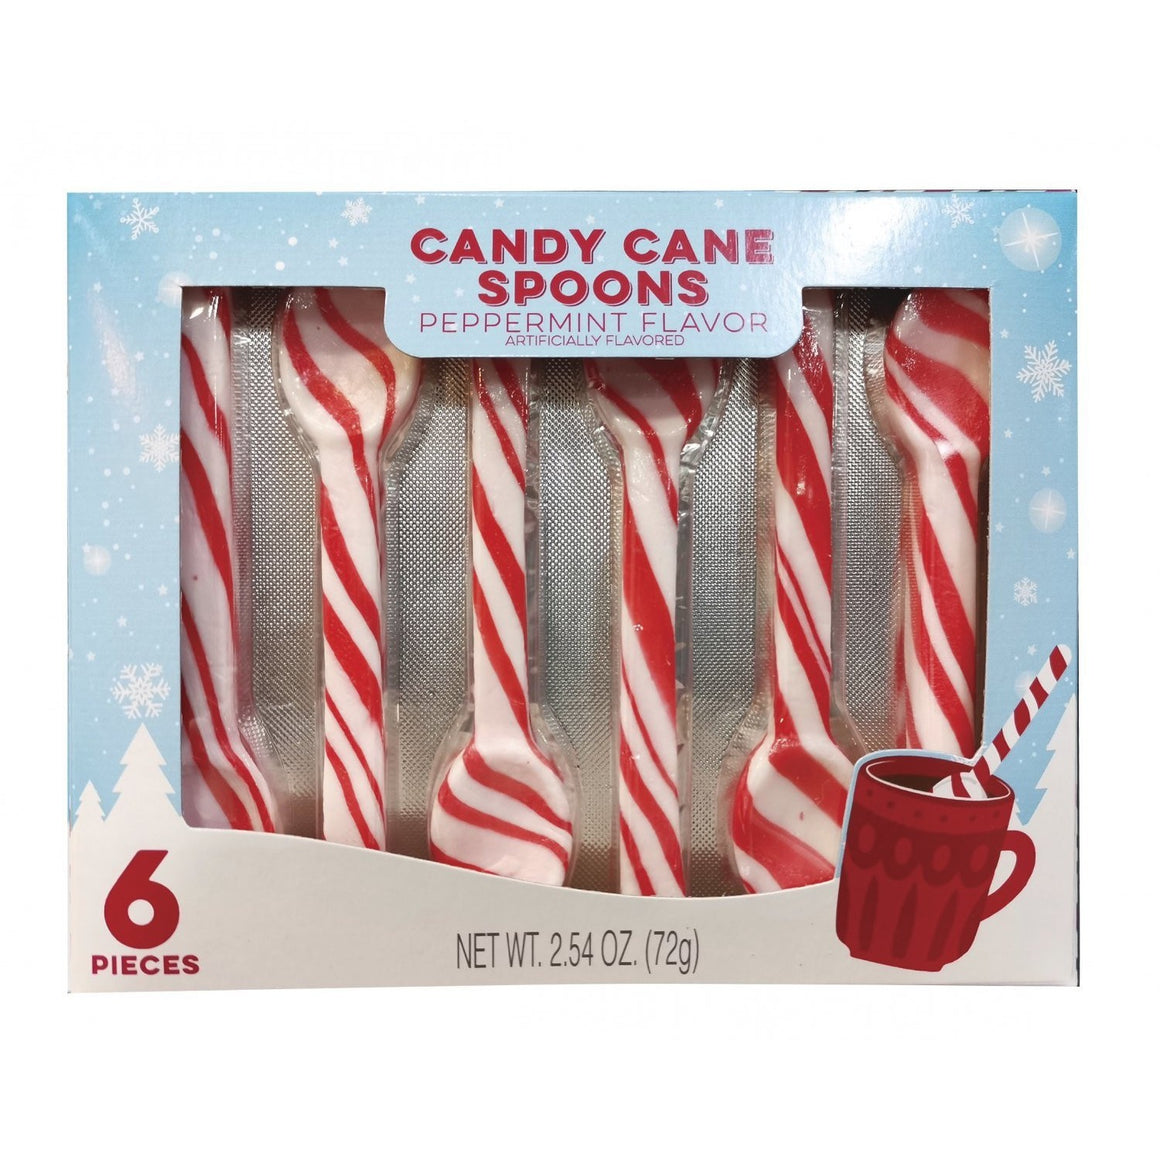 All City Candy Peppermint Candy Spoons 6 piece Box 2.54 oz. Christmas Hilco For fresh candy and great service, visit www.allcitycandy.com